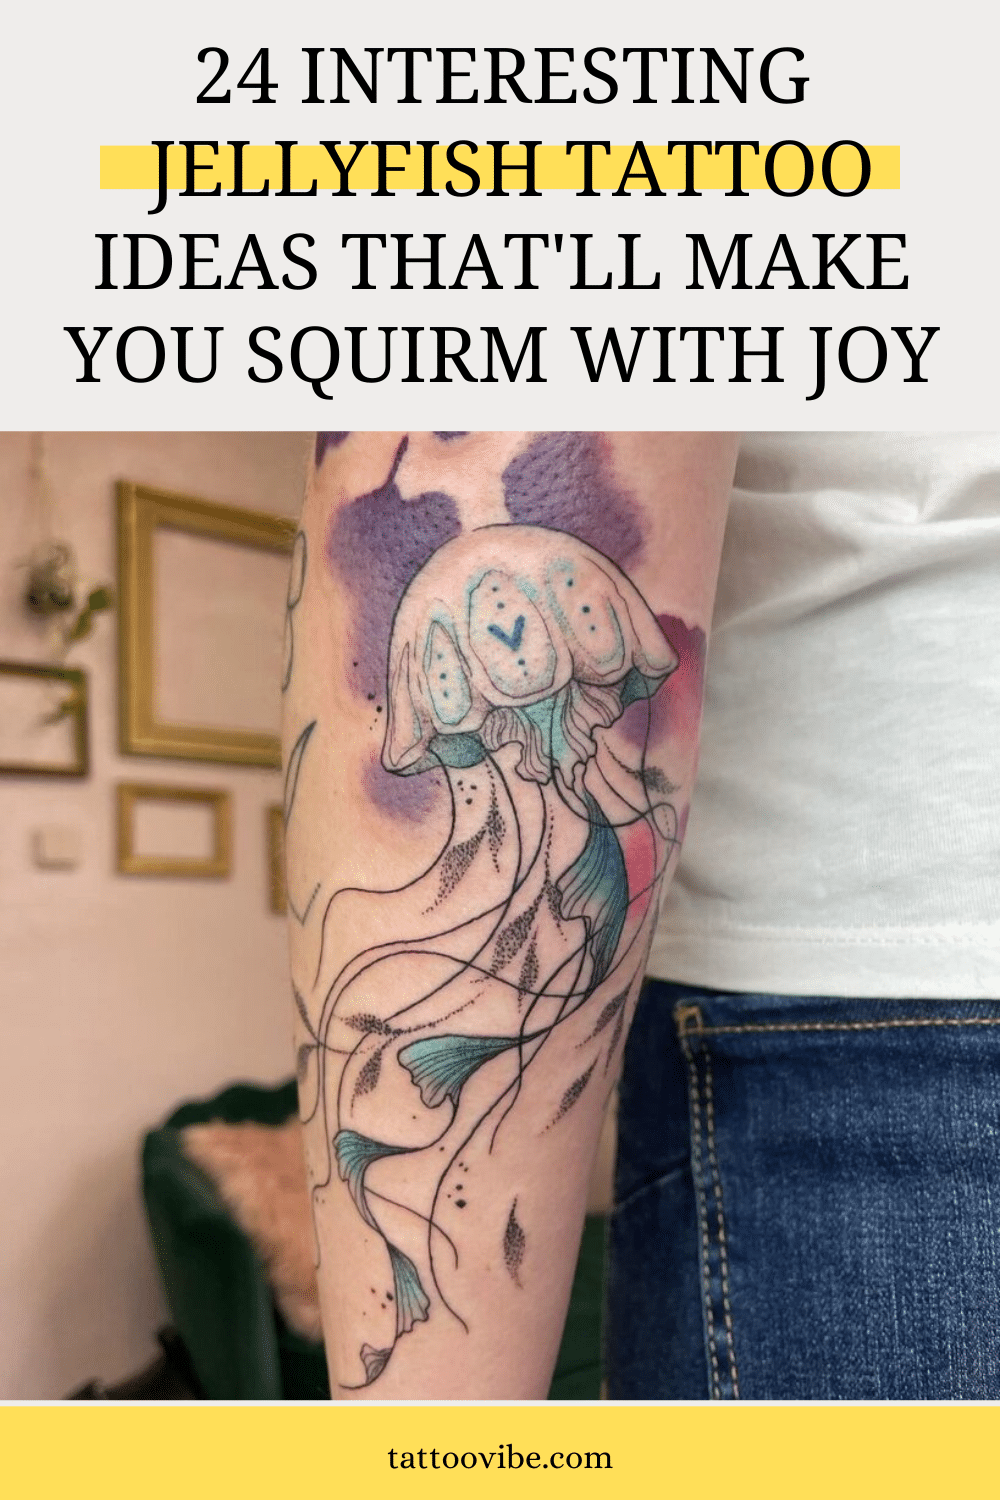 24 Interesting Jellyfish Tattoo Ideas That'll Make You Squirm With Joy